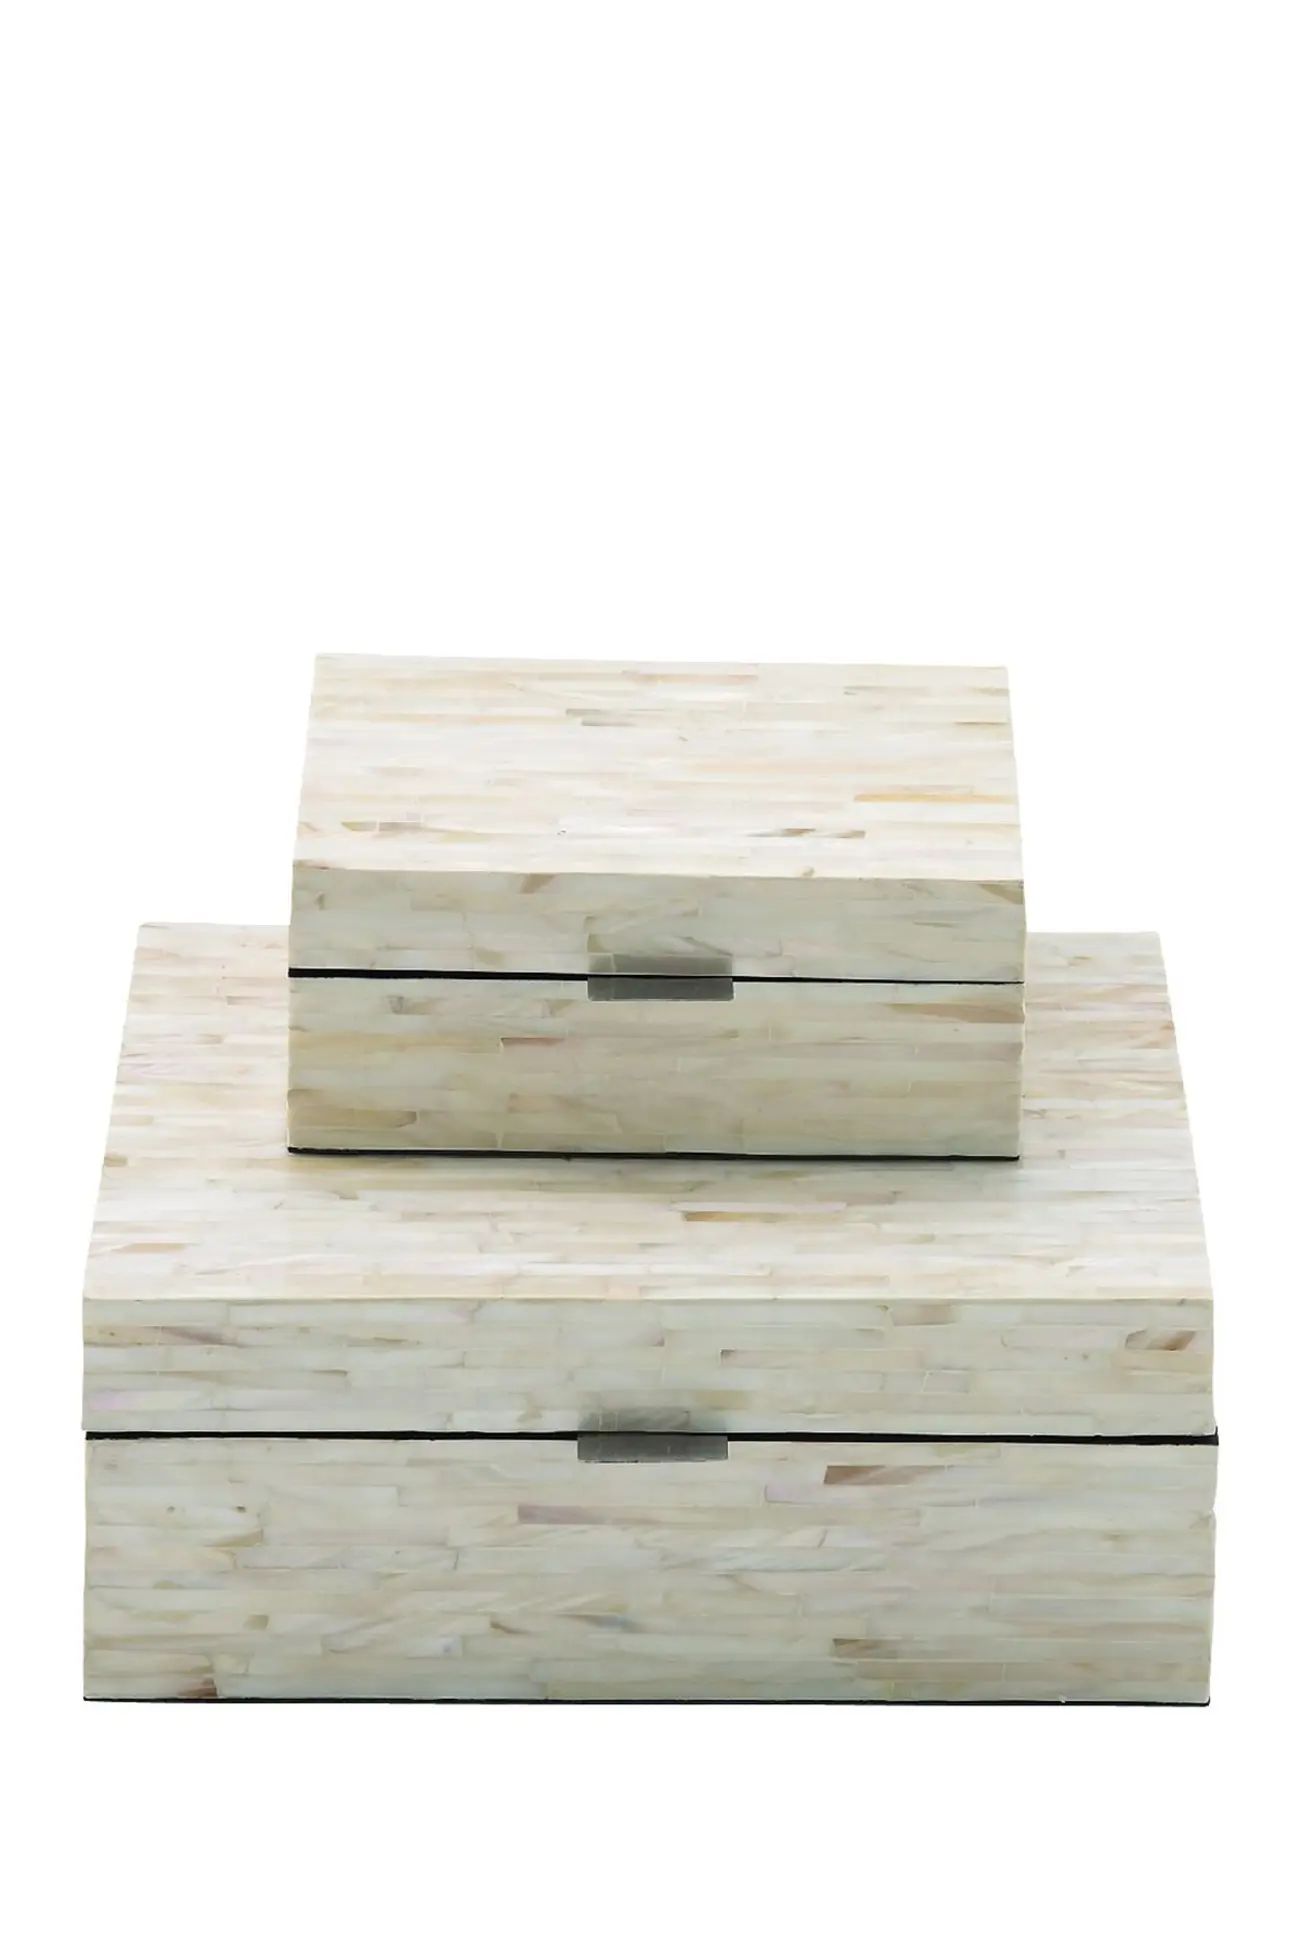 Willow Row | Mother of Pearl Inlay Box - Set of 2 | Nordstrom Rack | Nordstrom Rack